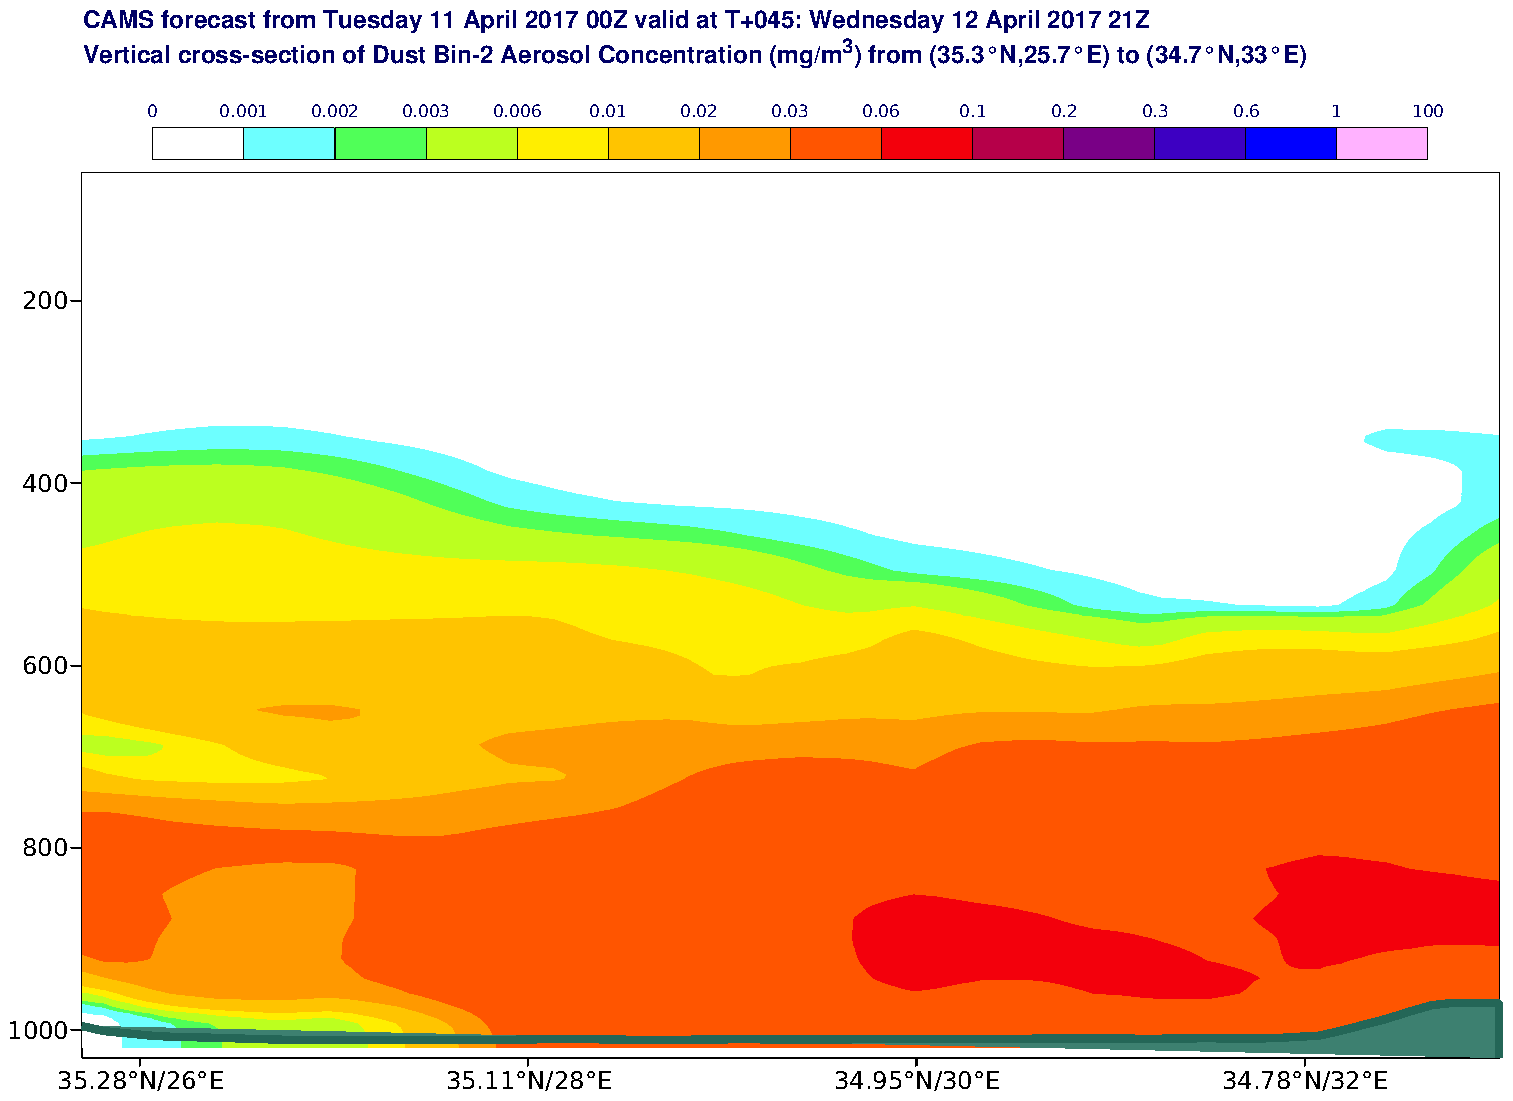 Vertical cross-section of Dust Bin-2 Aerosol Concentration (mg/m3) valid at T45 - 2017-04-12 21:00